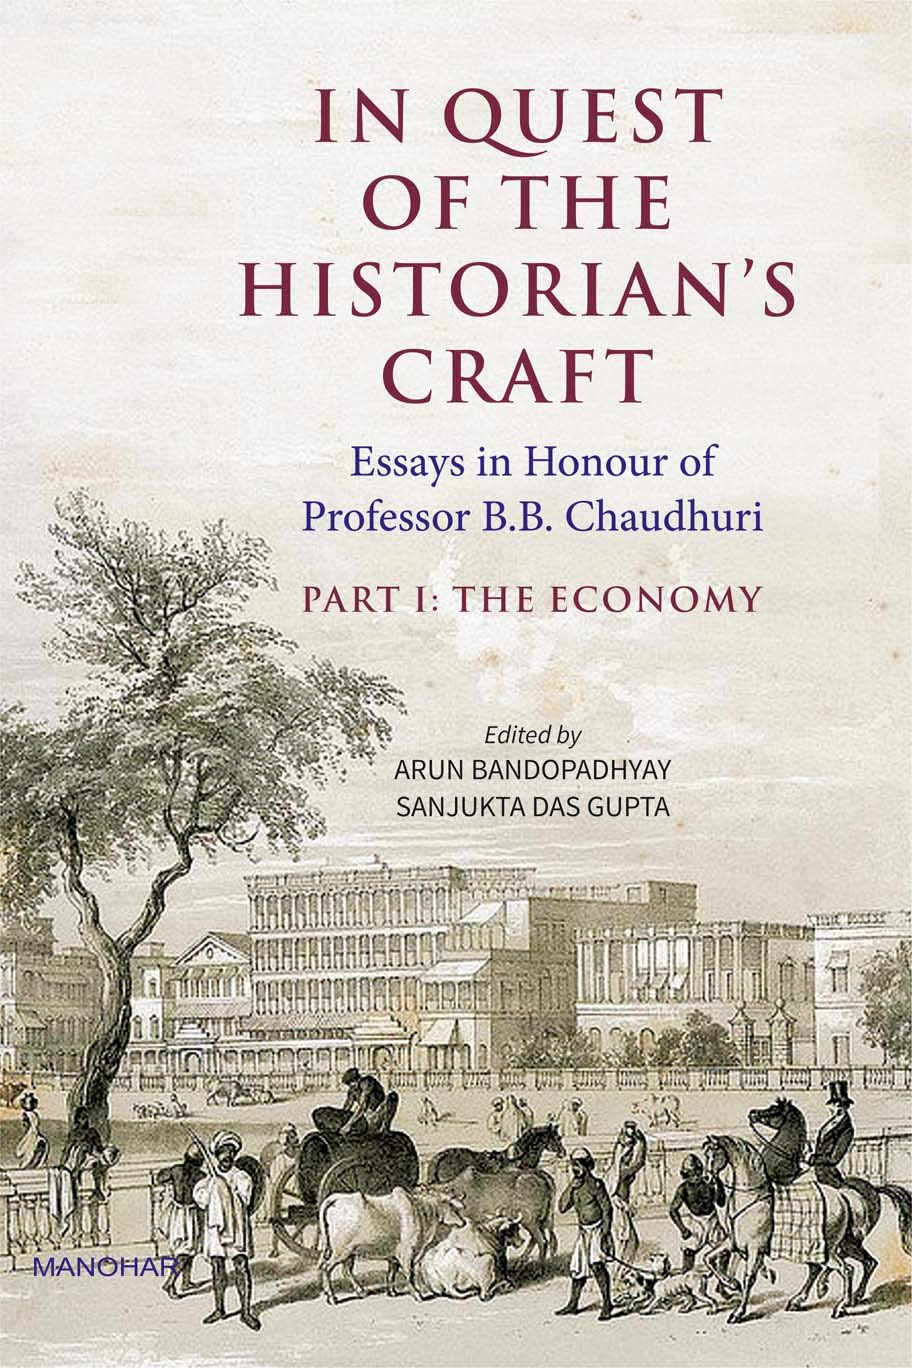 In Quest of the Historian's Craft: Part I The Economy